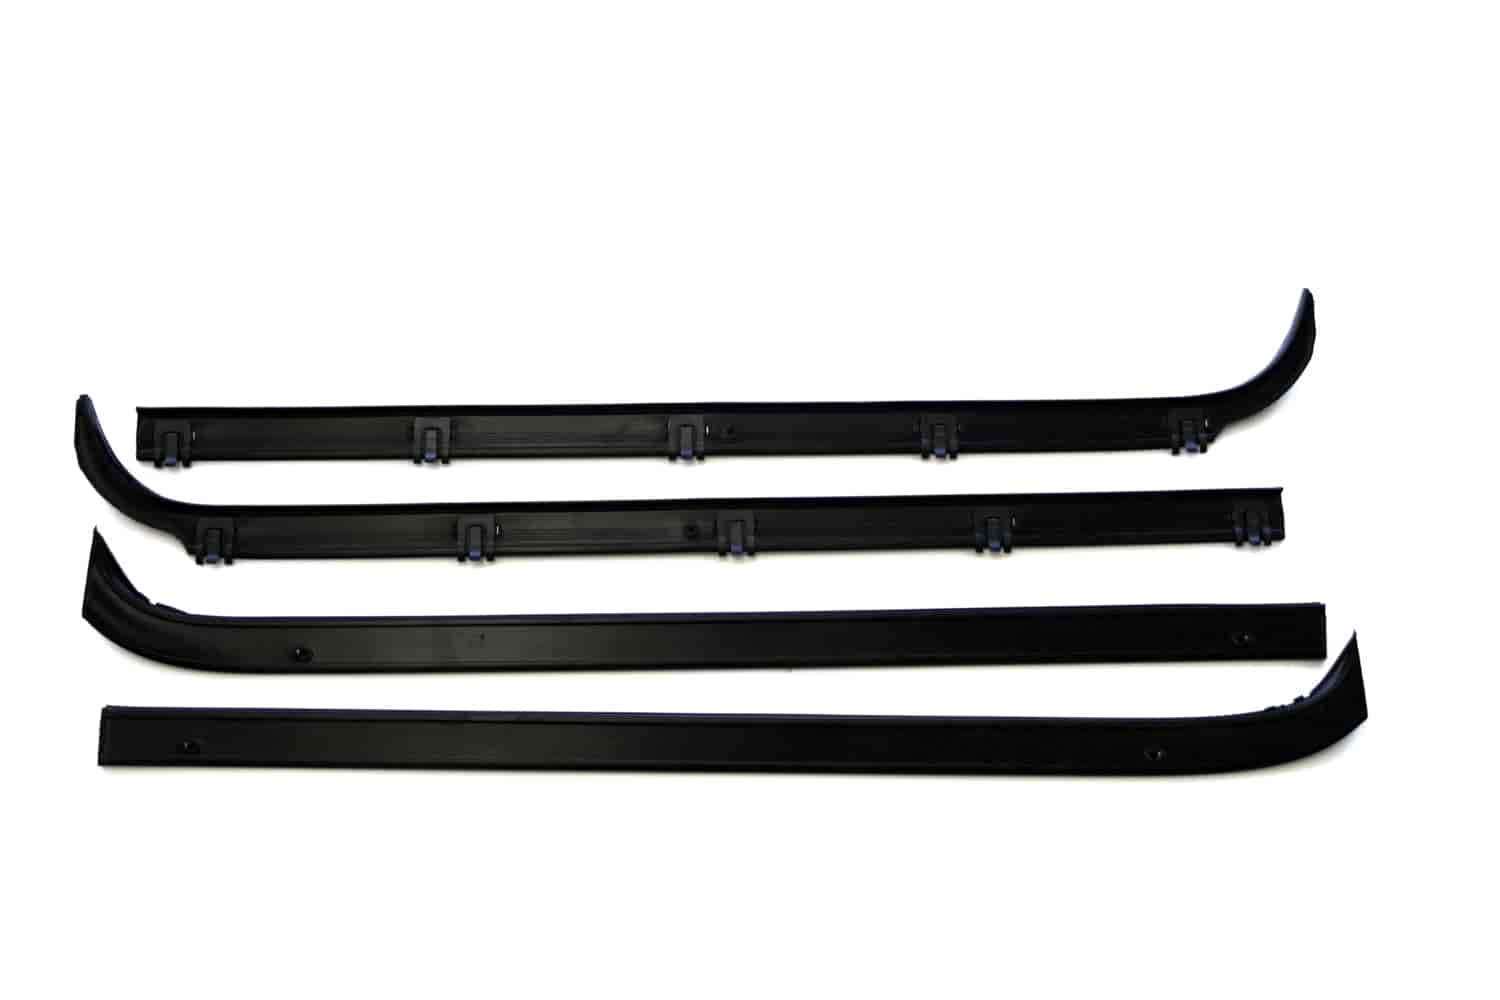 1981 Ford Bronco Window sweeper kit. Fits 80-87 Ford Bronco and Truck 2 Door Extended/Standard-WC 6600-12